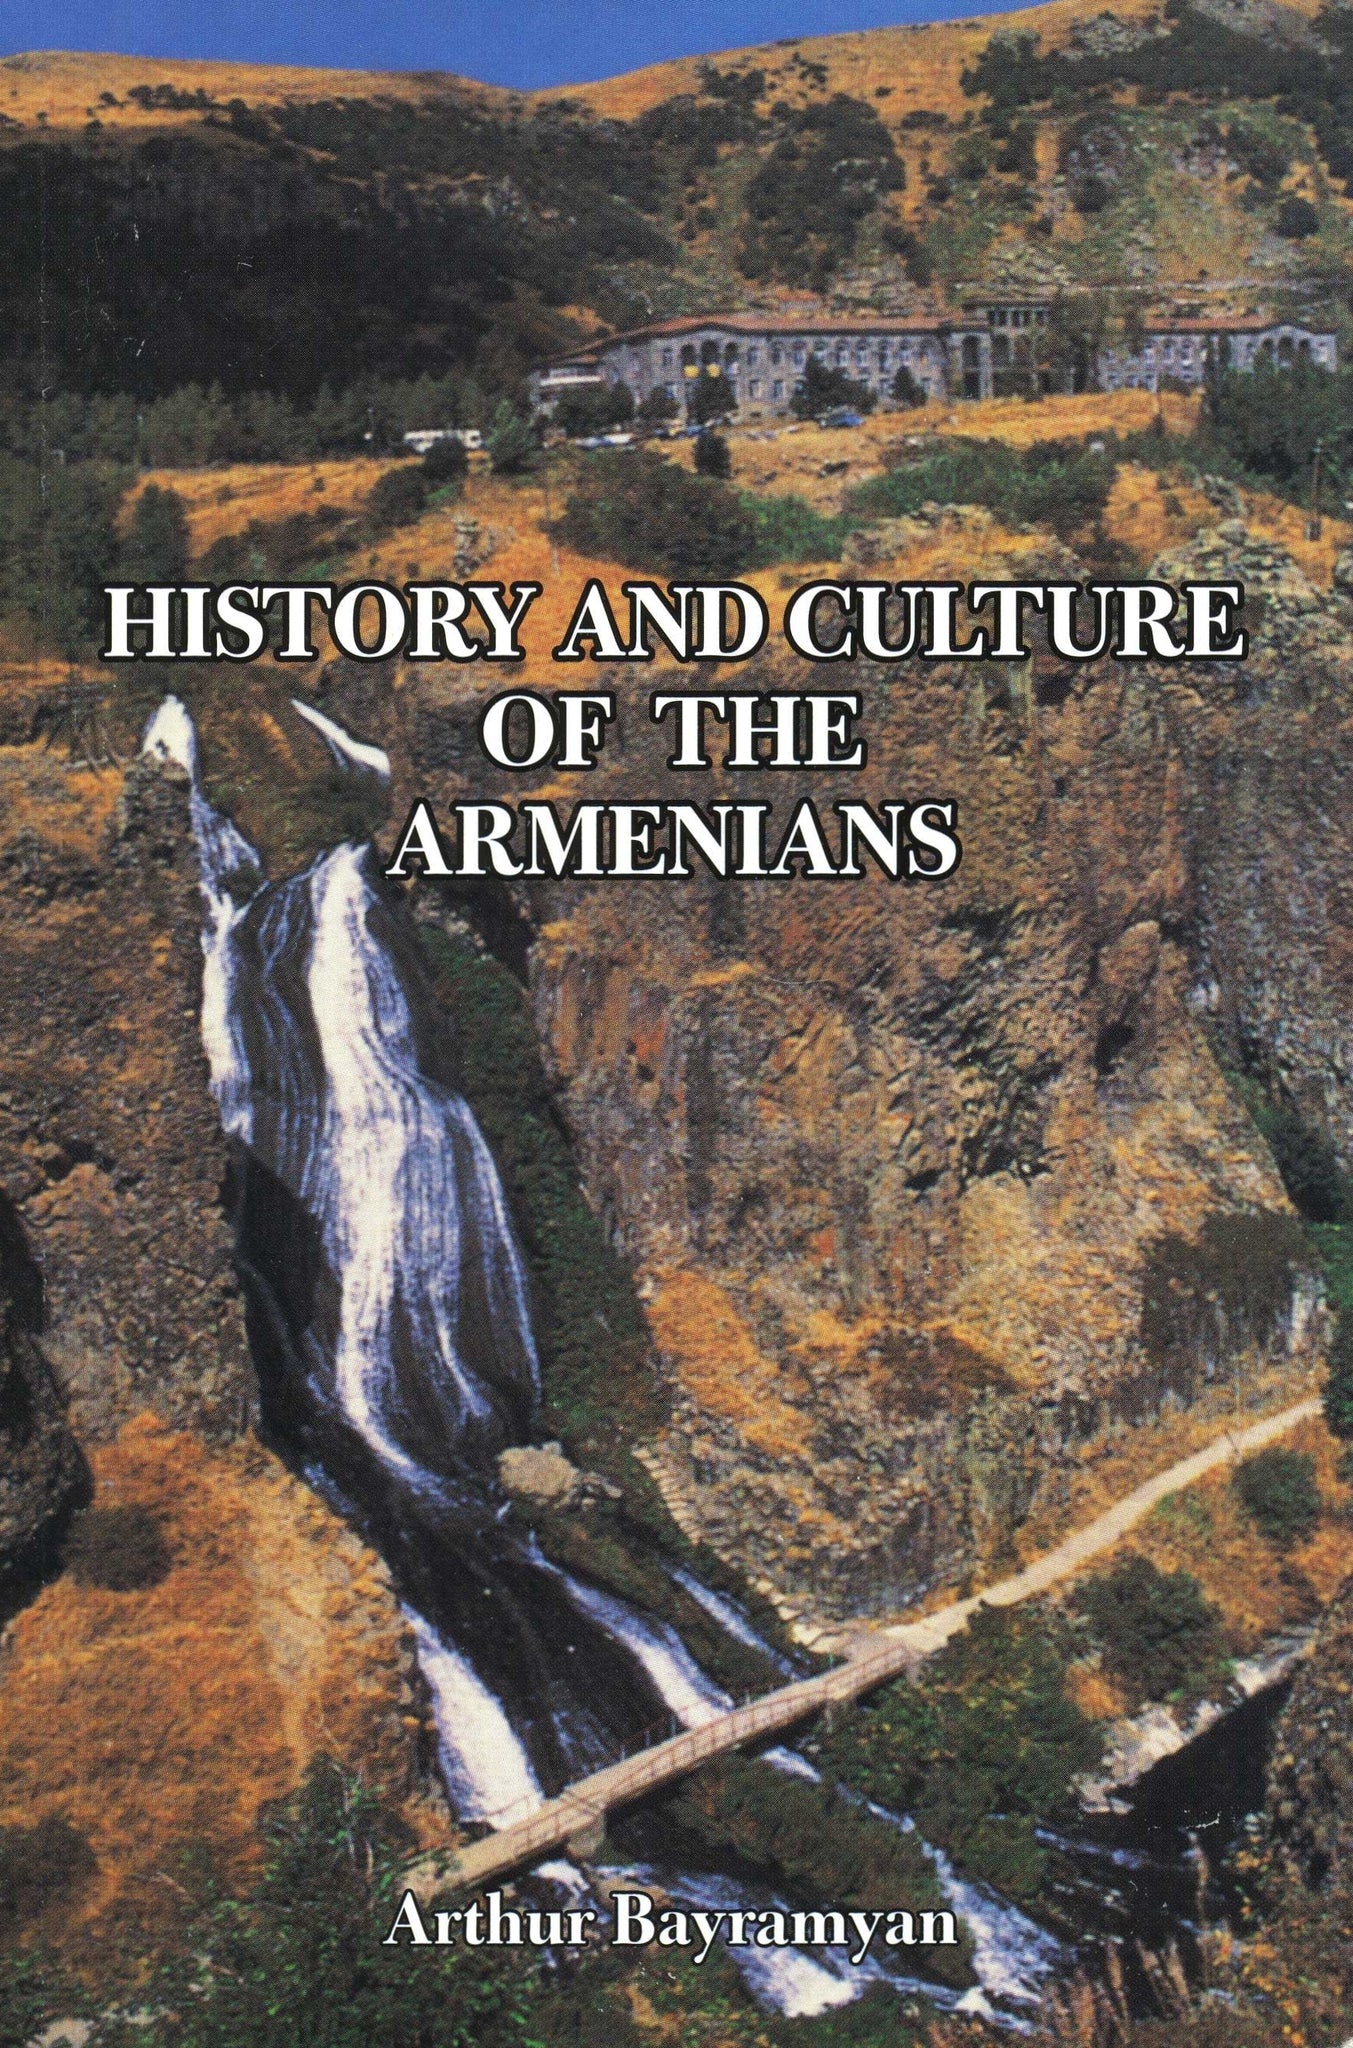 HISTORY AND CULTURE OF THE ARMENIANS